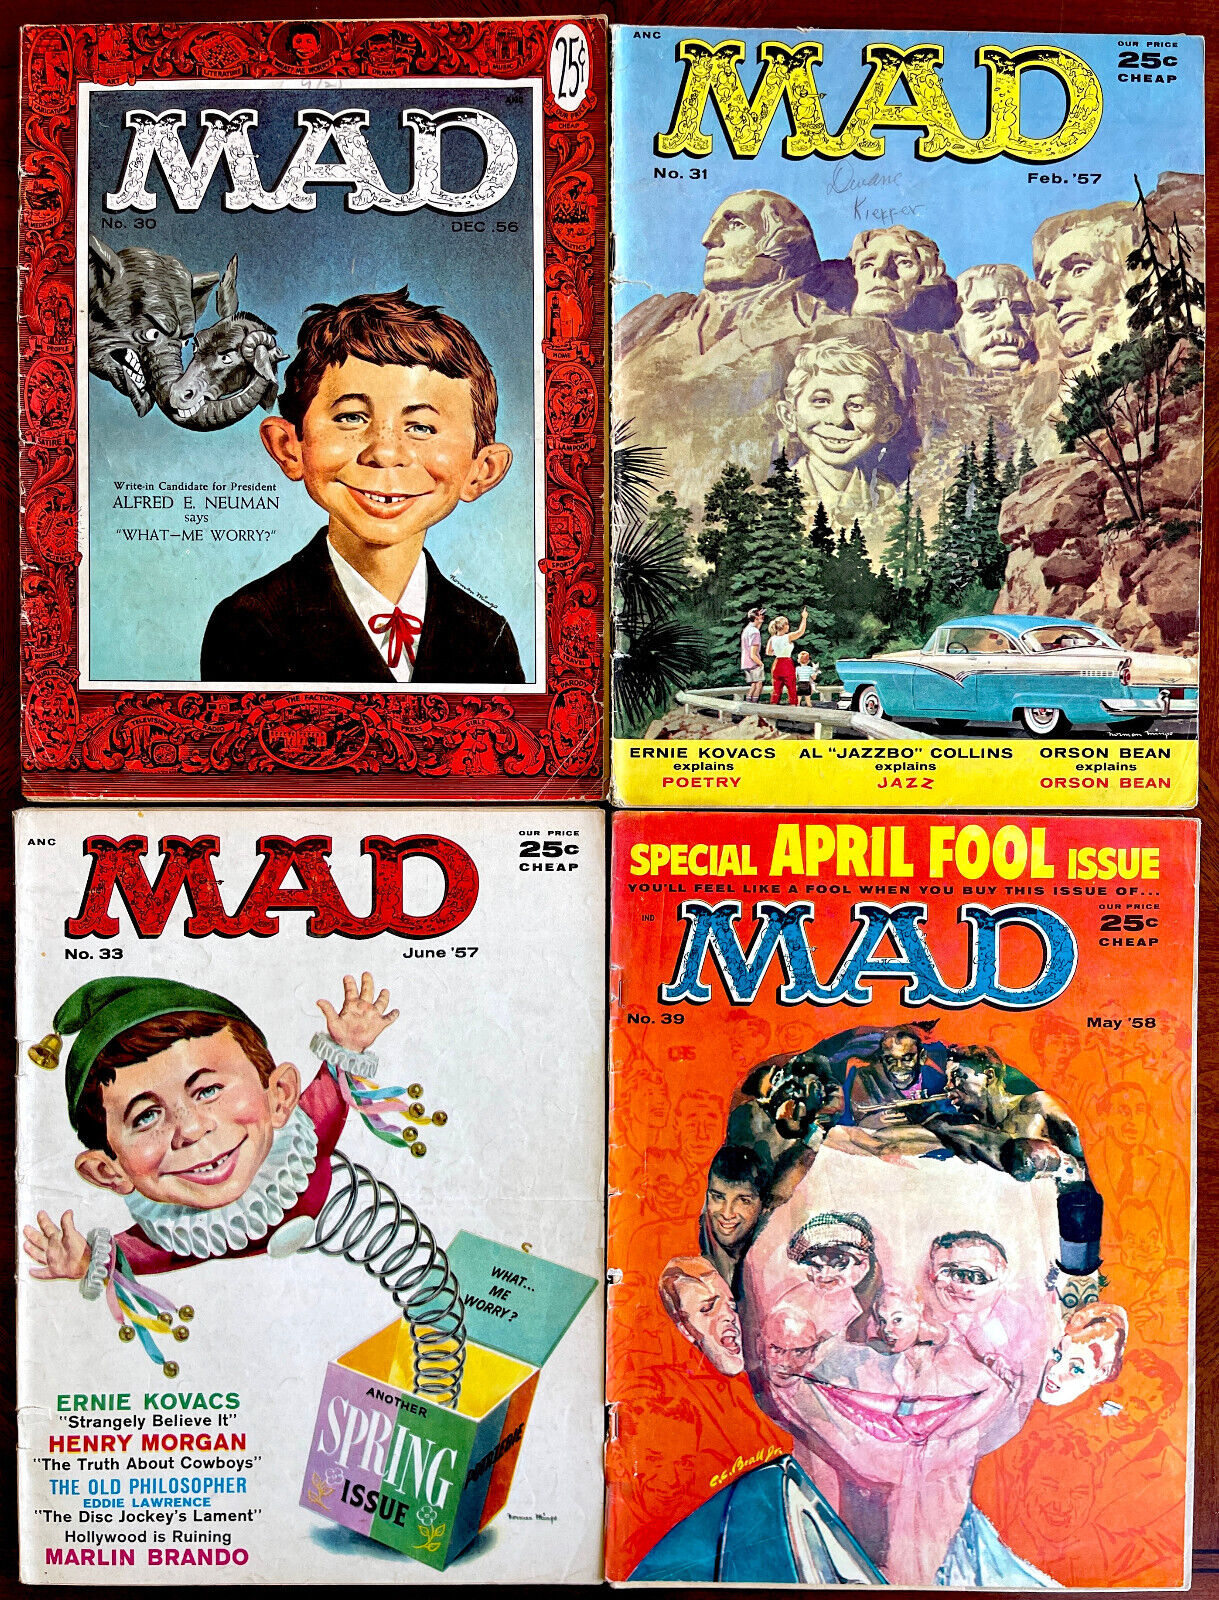 4 early MAD MAGAZINES from 1950's  #30, 31, 33, 39 - Read Descriptions below